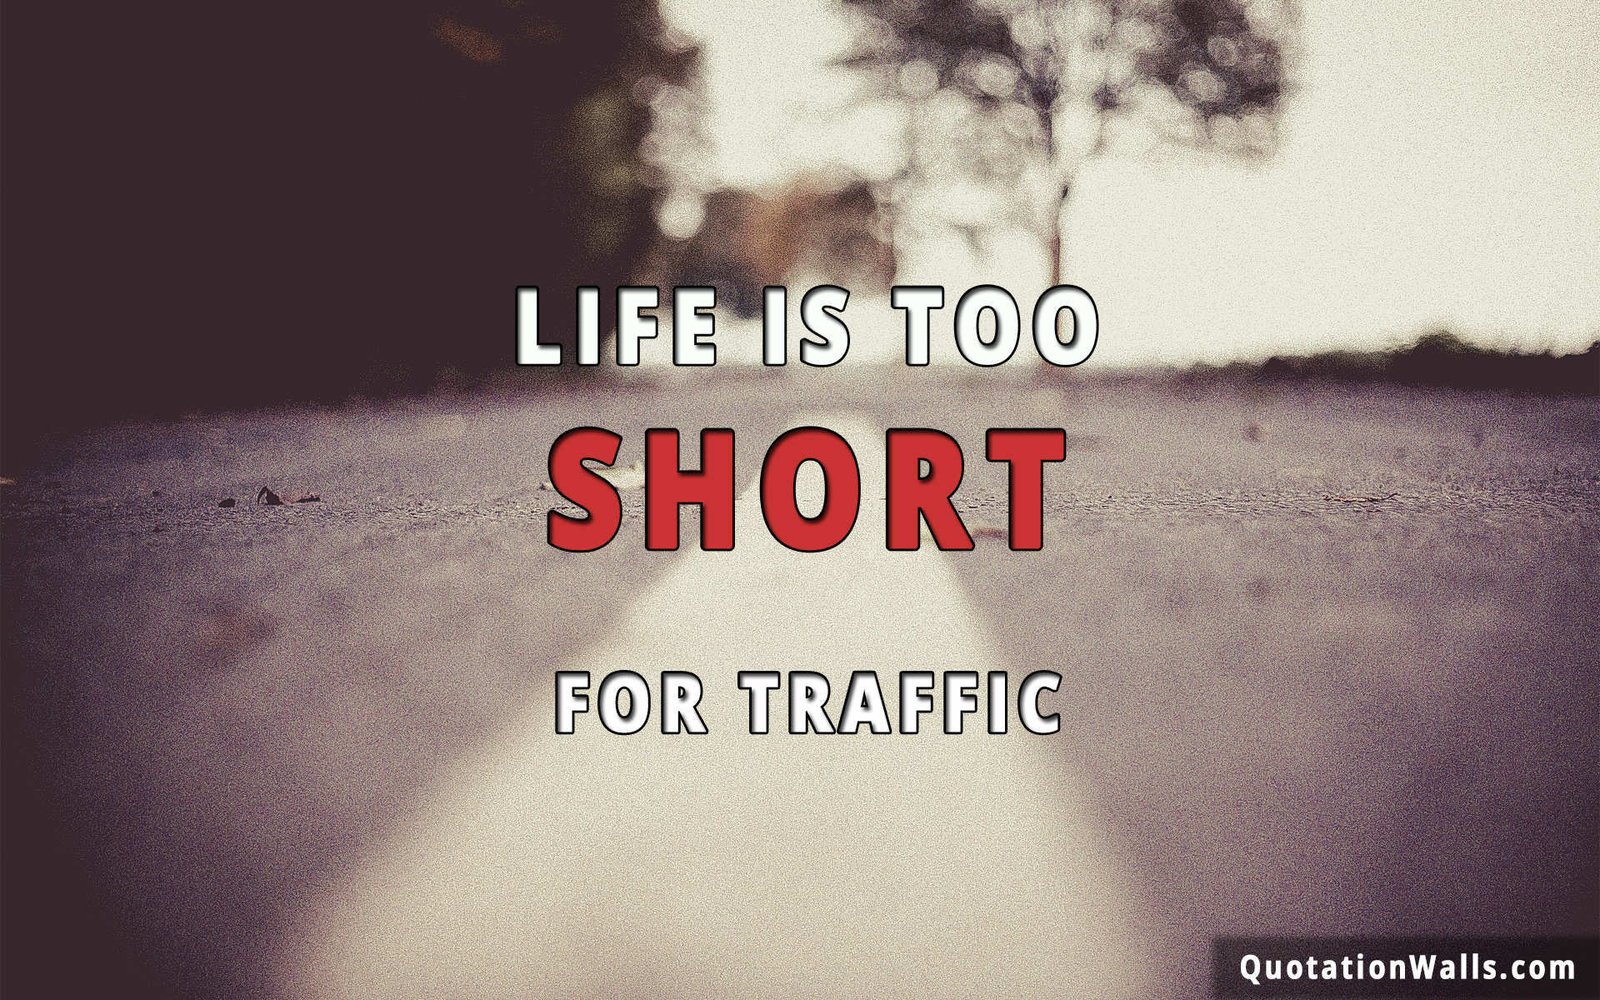 Life Is Too Short Life Wallpaper for Mobile - QuotationWalls